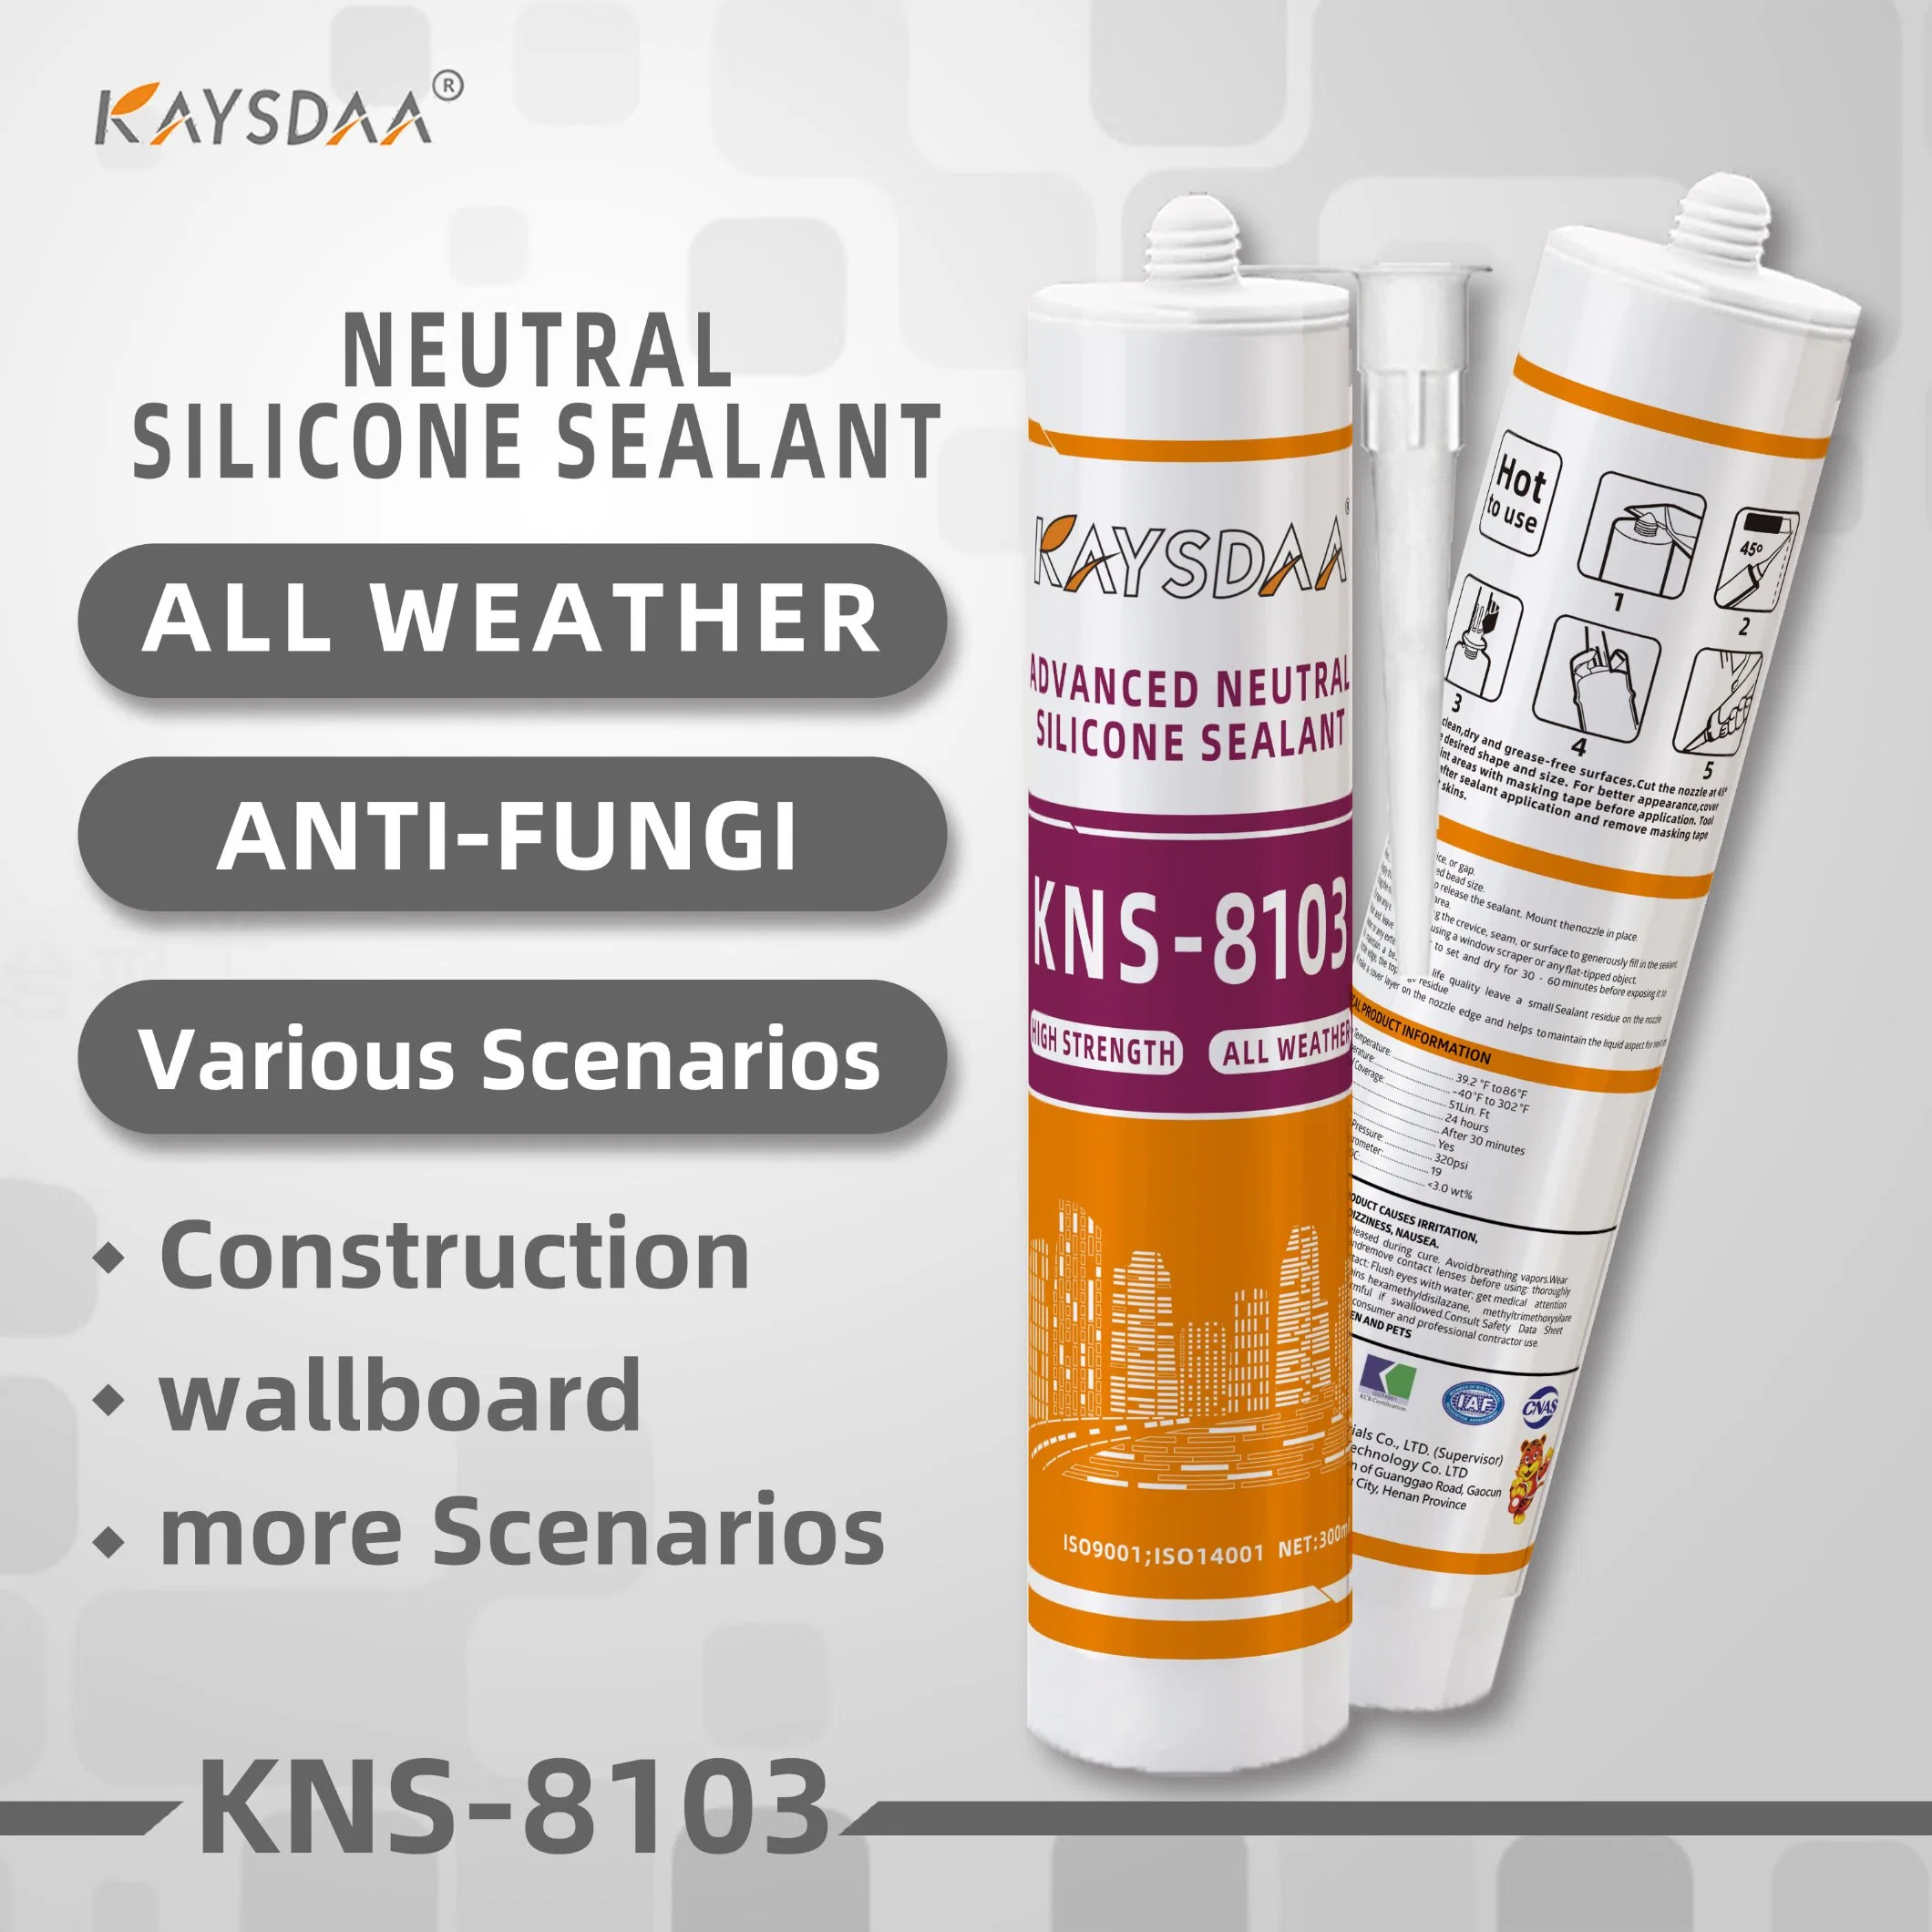 Kns-8103 Neutral Silicone Sealant and Adhesive with Structural Bonding